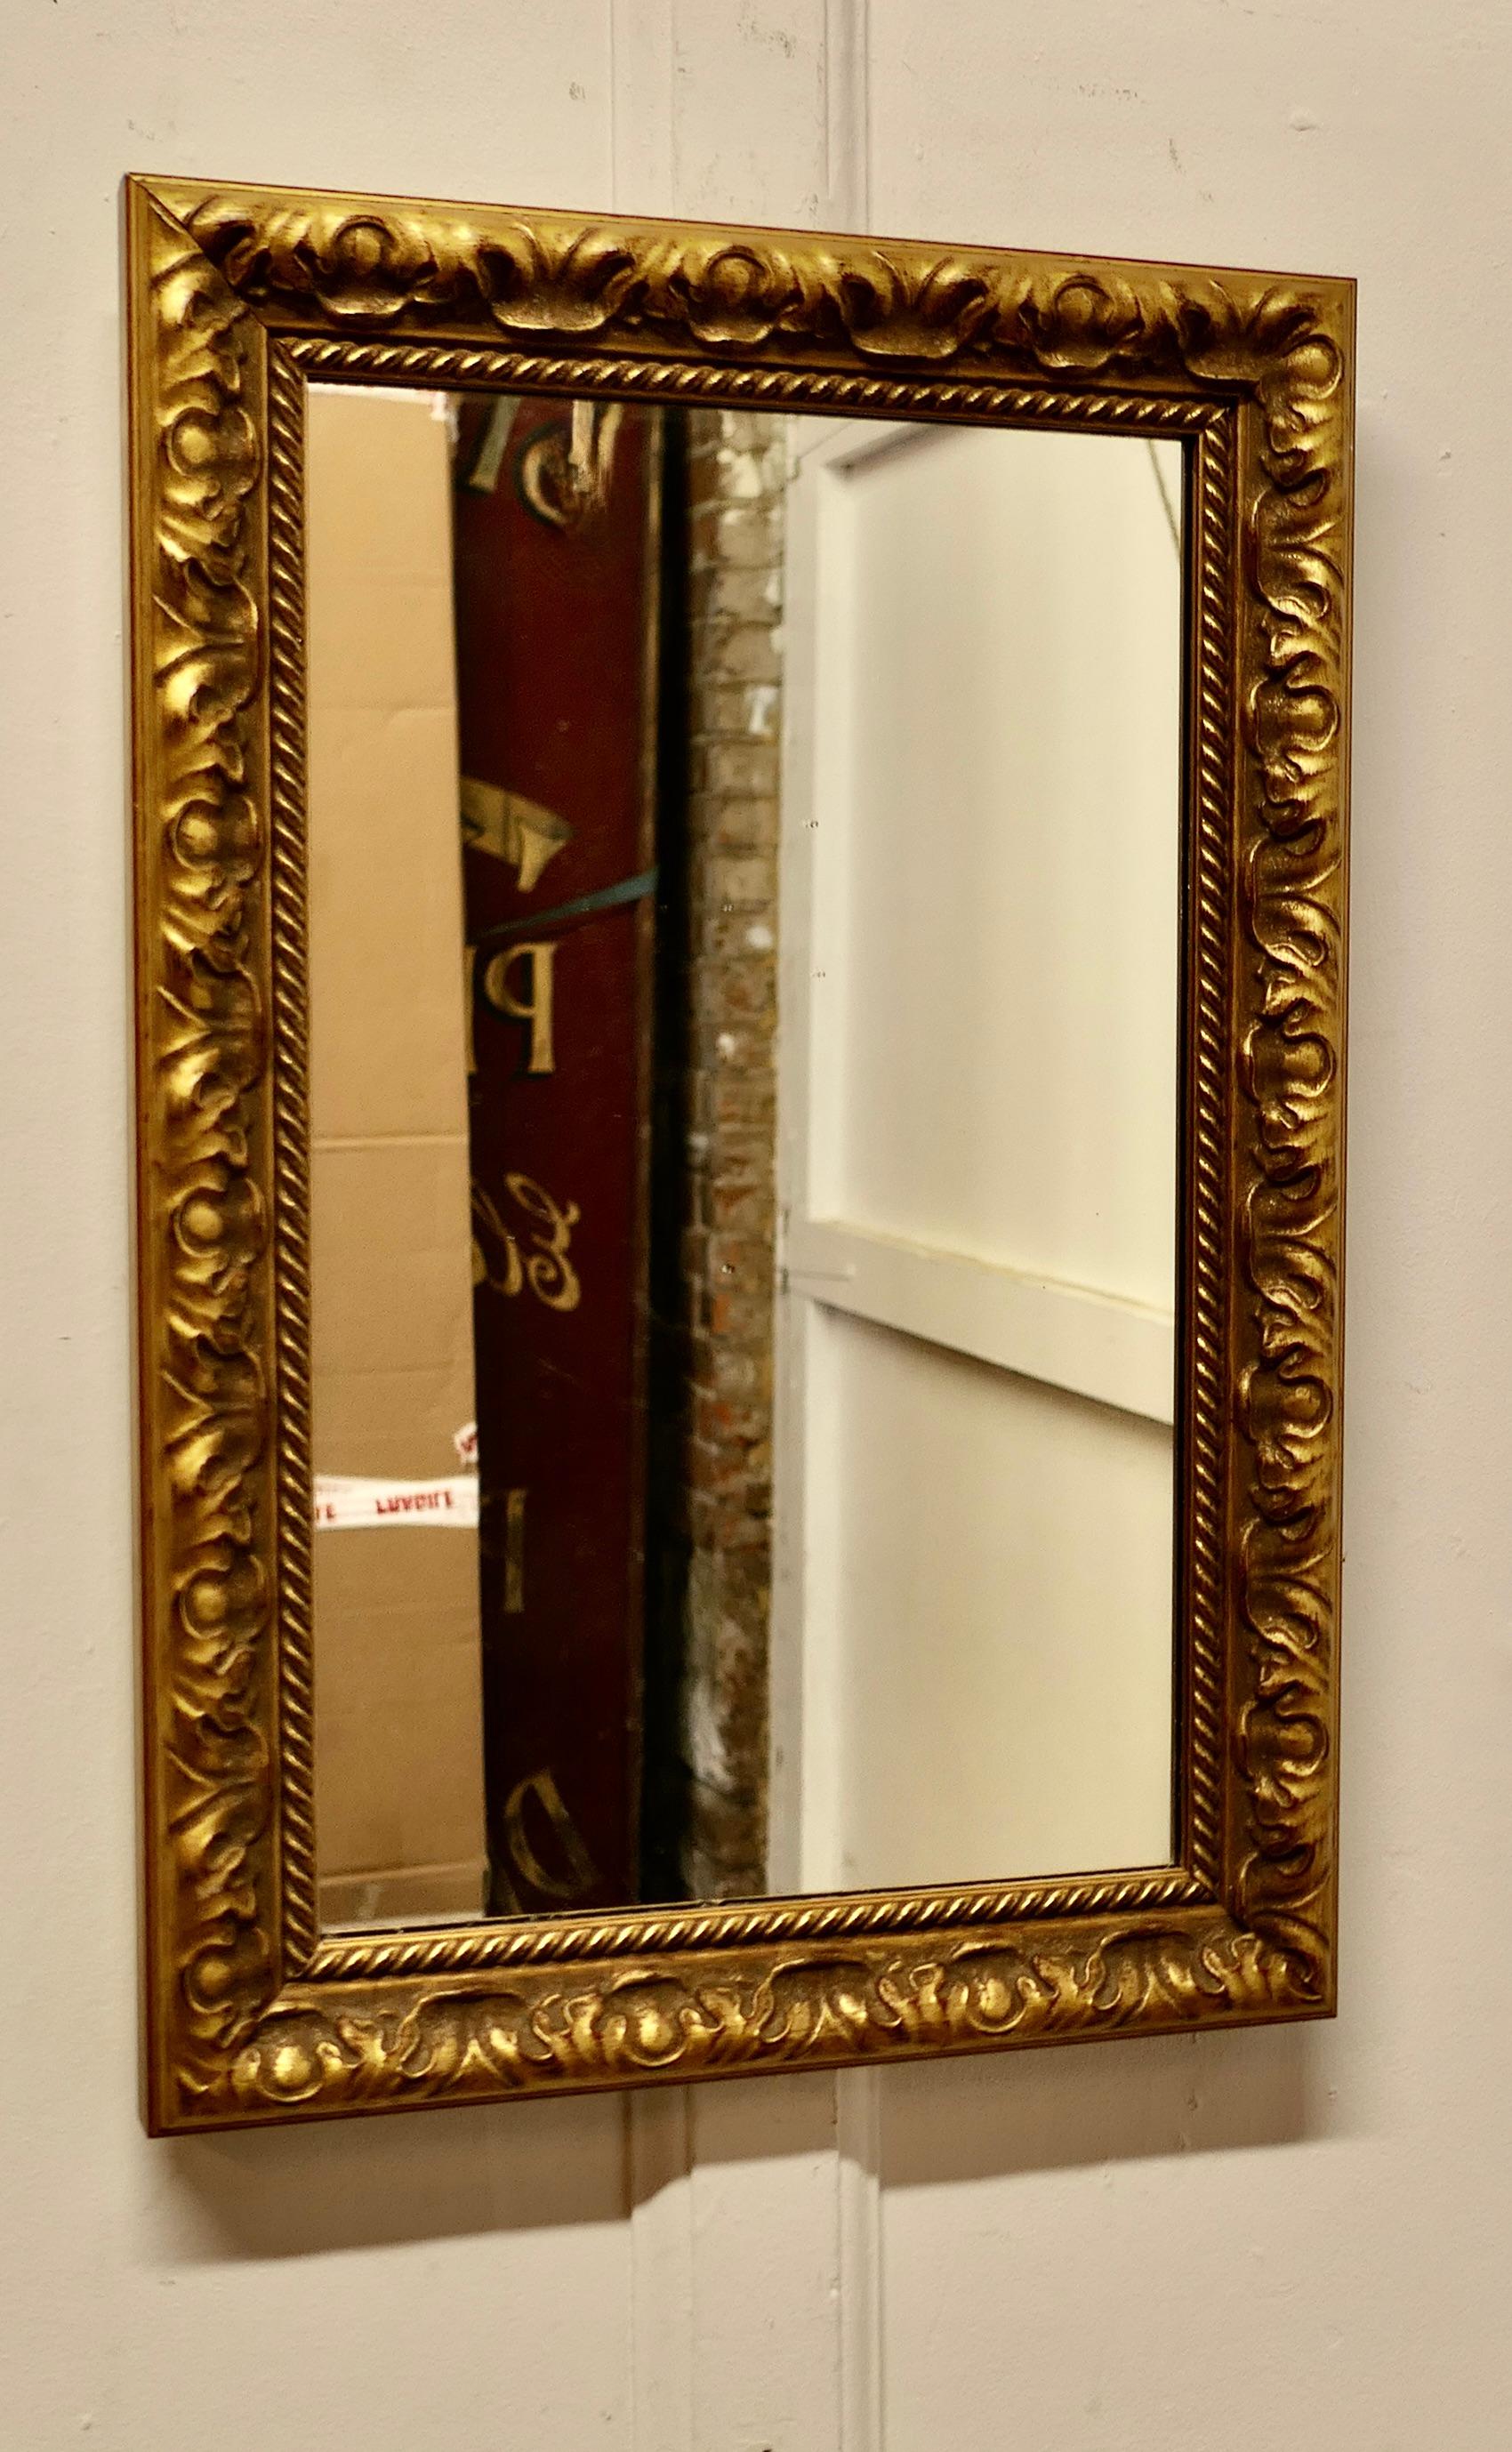 Rectangular Gilt Wall Mirror

The mirror is in a 2” wide decorated Gilt Frame, this can be hung Both Landscape and Portrait it is a good size and a very attractive piece
The glass and the frame are in good antique condition  
The overall size  is